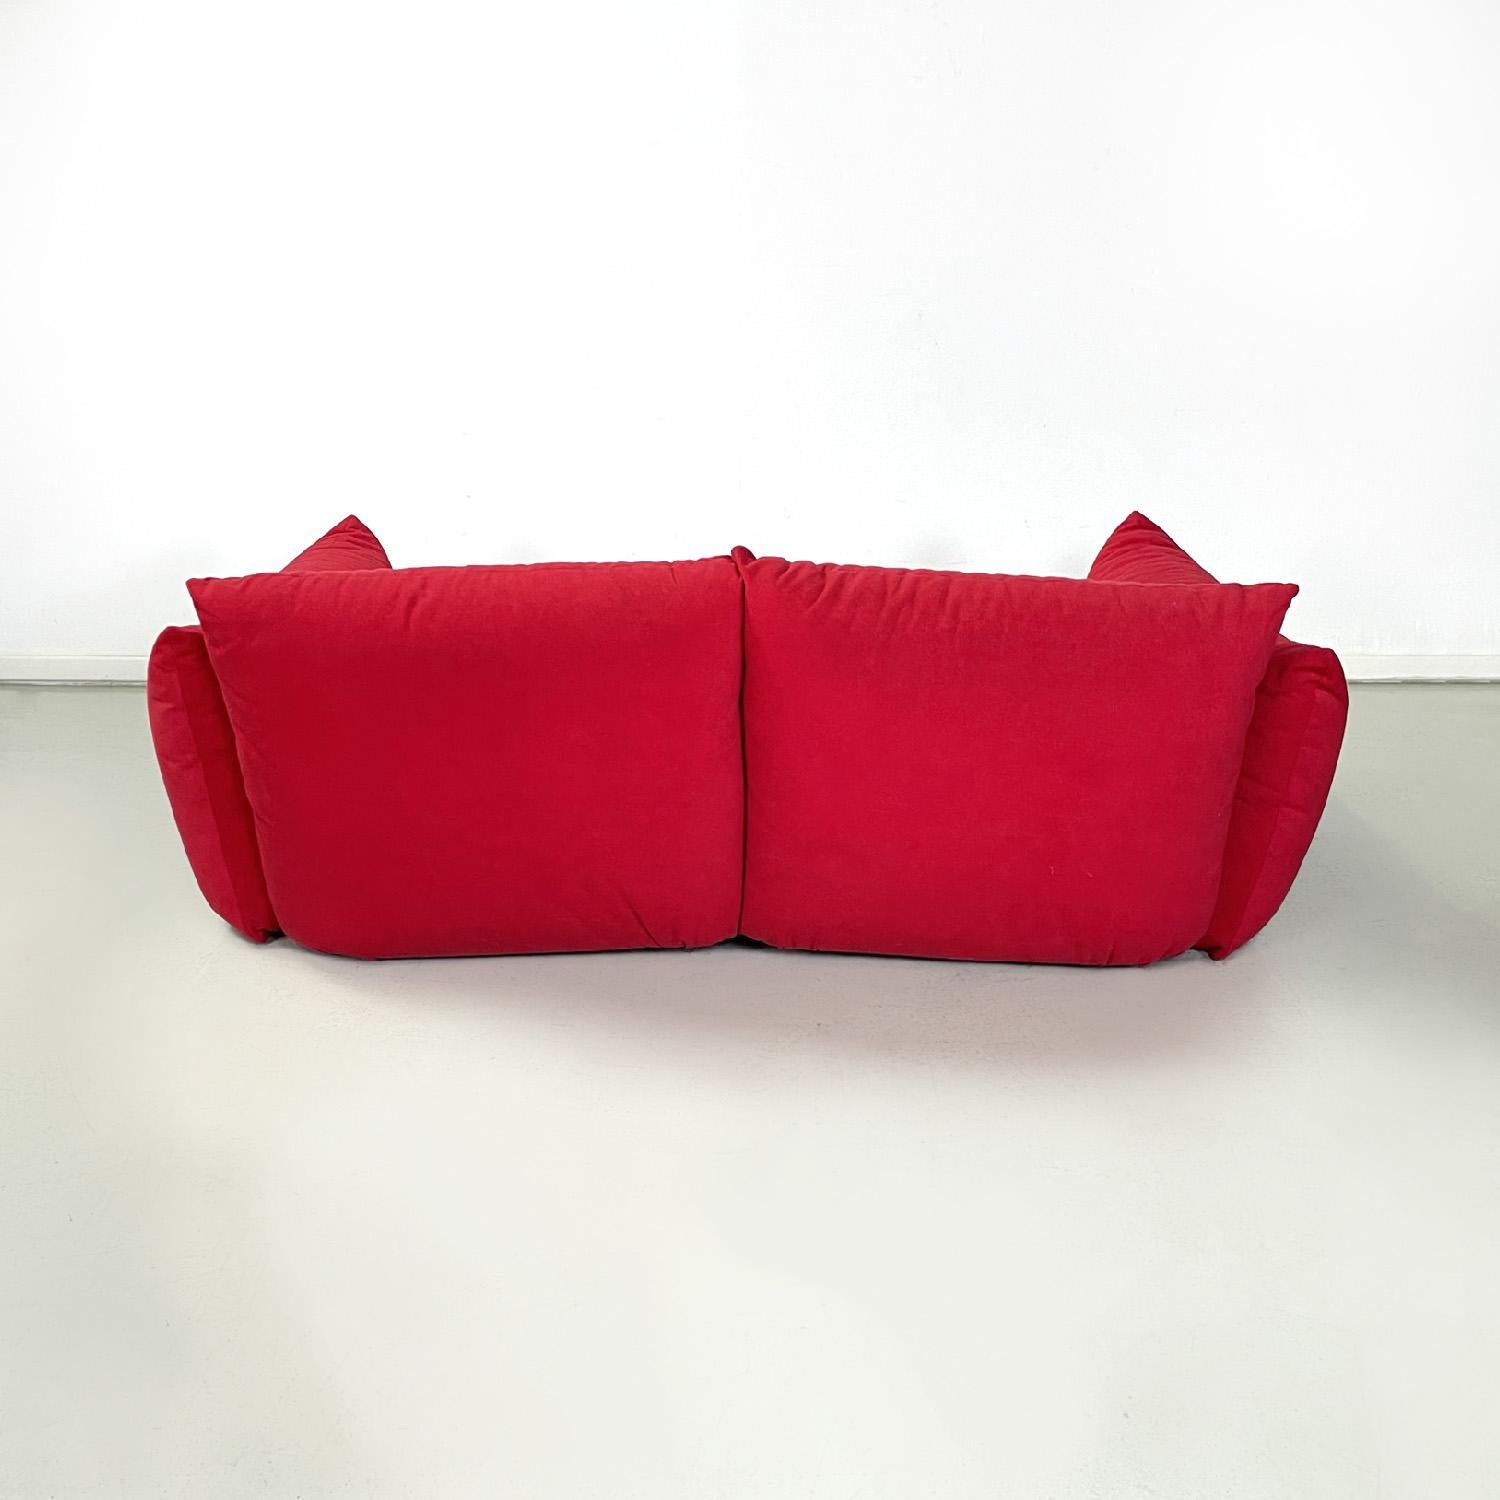 Modern Italian modern red living room Marenco by Mario Marenco for Arflex, 1970s For Sale